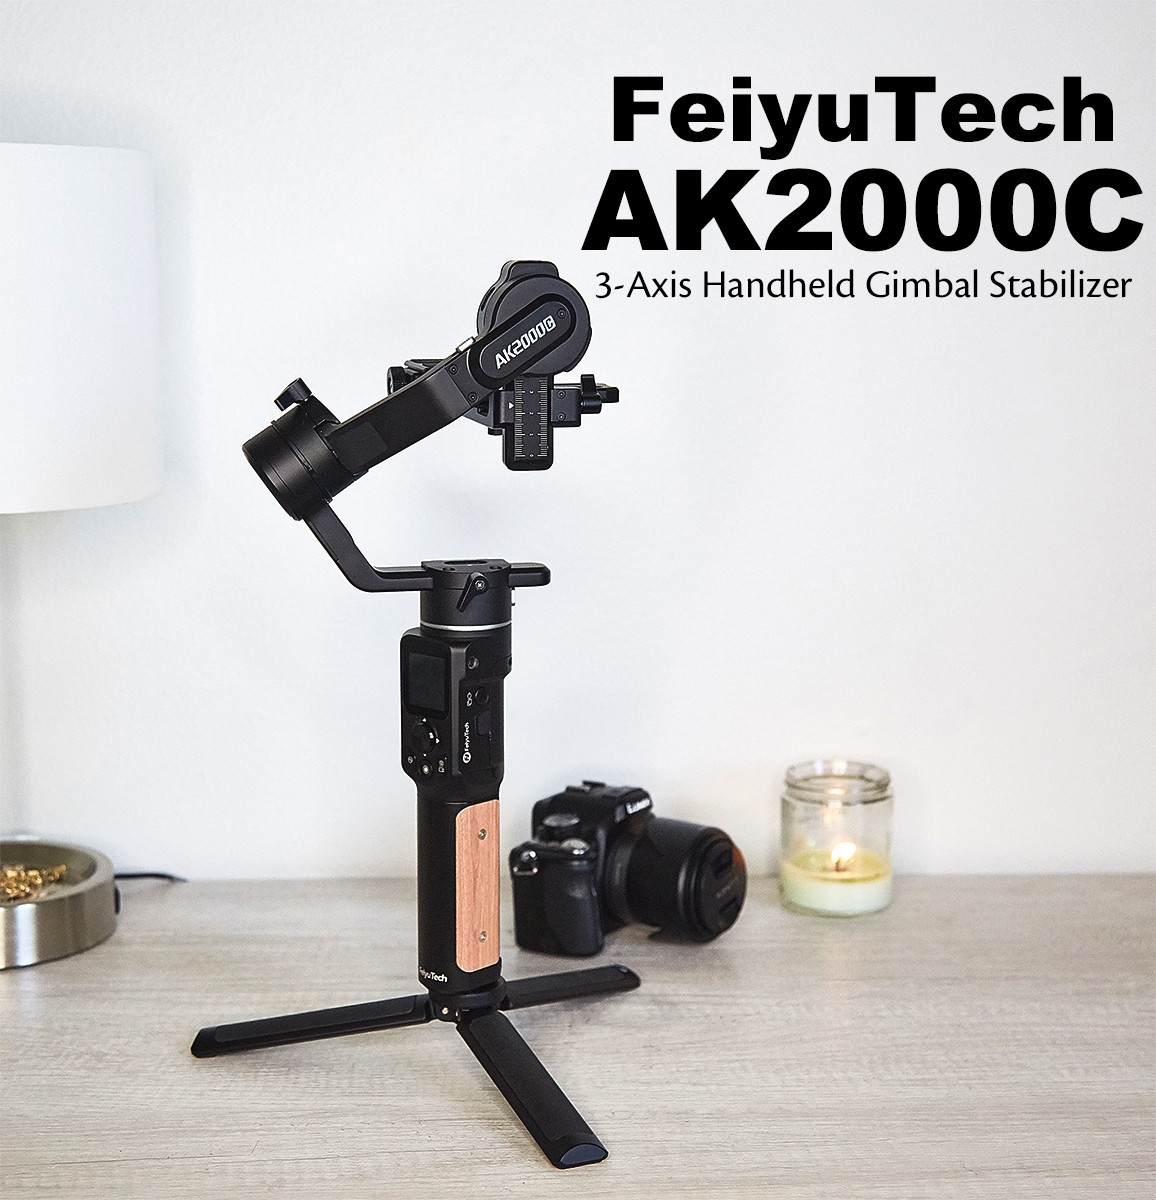 FeiyuTech AK2000C 3 Axis Handheld Stabilizer Gimbal Review - The 